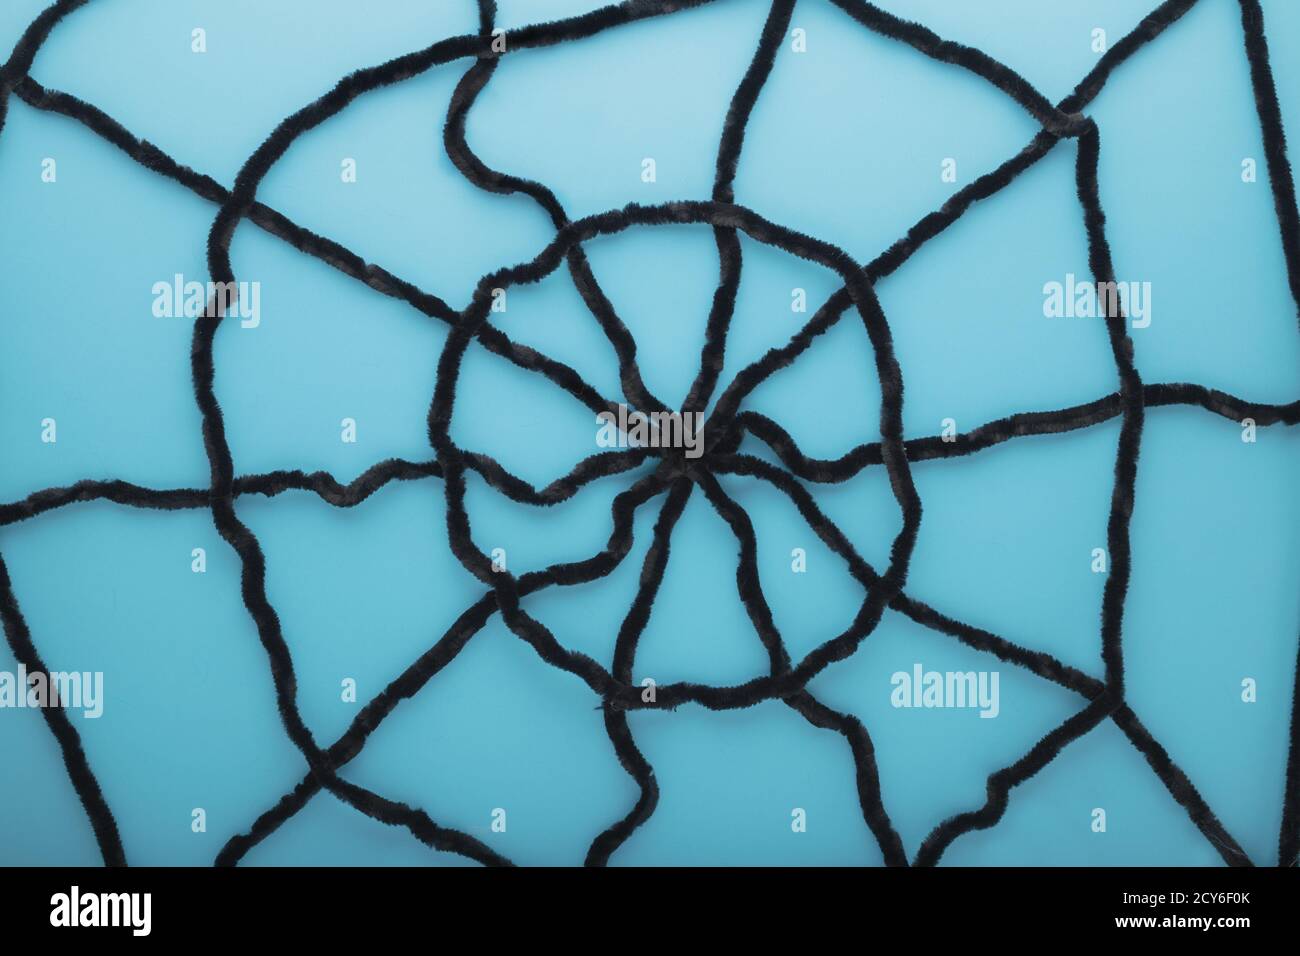 Giant spider web on a blue background. Halloween decorations concept. Flat lay, top view, copy space. Stock Photo